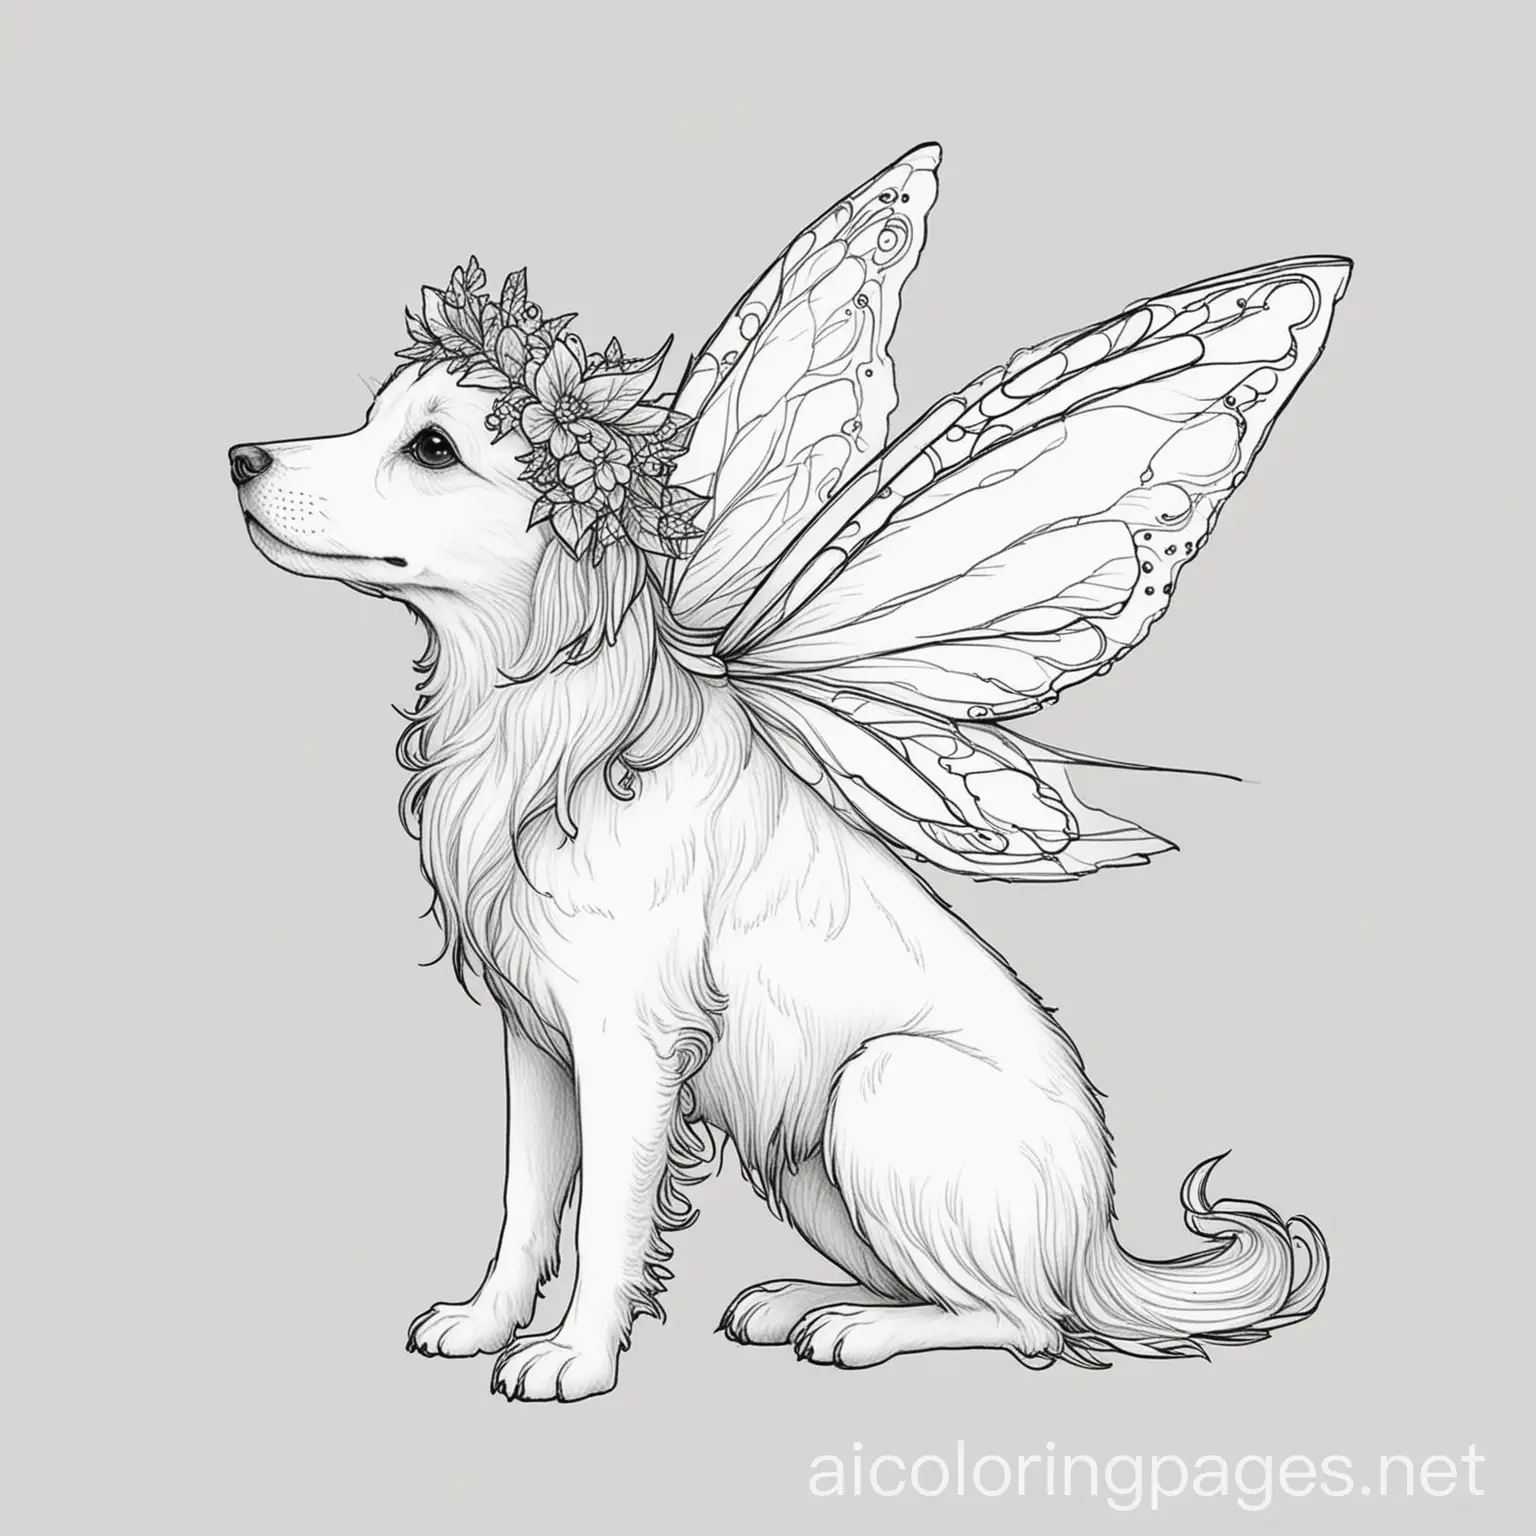 Fairy dog
, Coloring Page, black and white, line art, white background, Simplicity, Ample White Space. The background of the coloring page is plain white to make it easy for young children to color within the lines. The outlines of all the subjects are easy to distinguish, making it simple for kids to color without too much difficulty